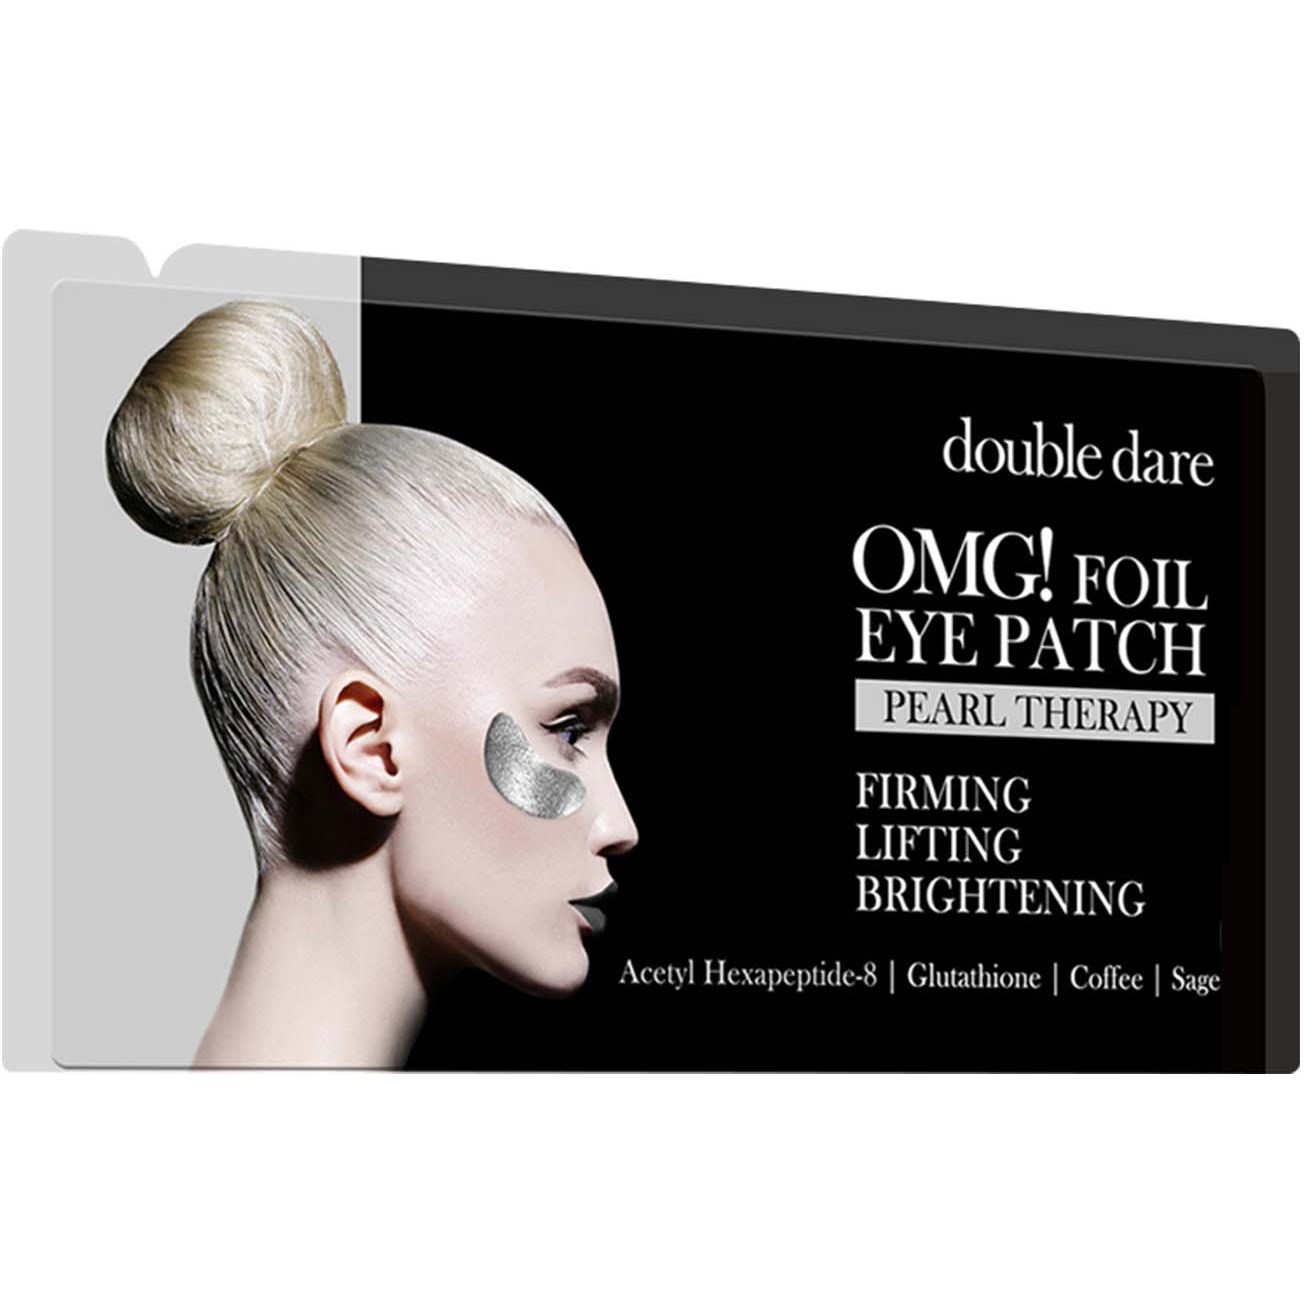 Läs mer om OMG! Double Dare Foil Eye Patch Pearl Therapy